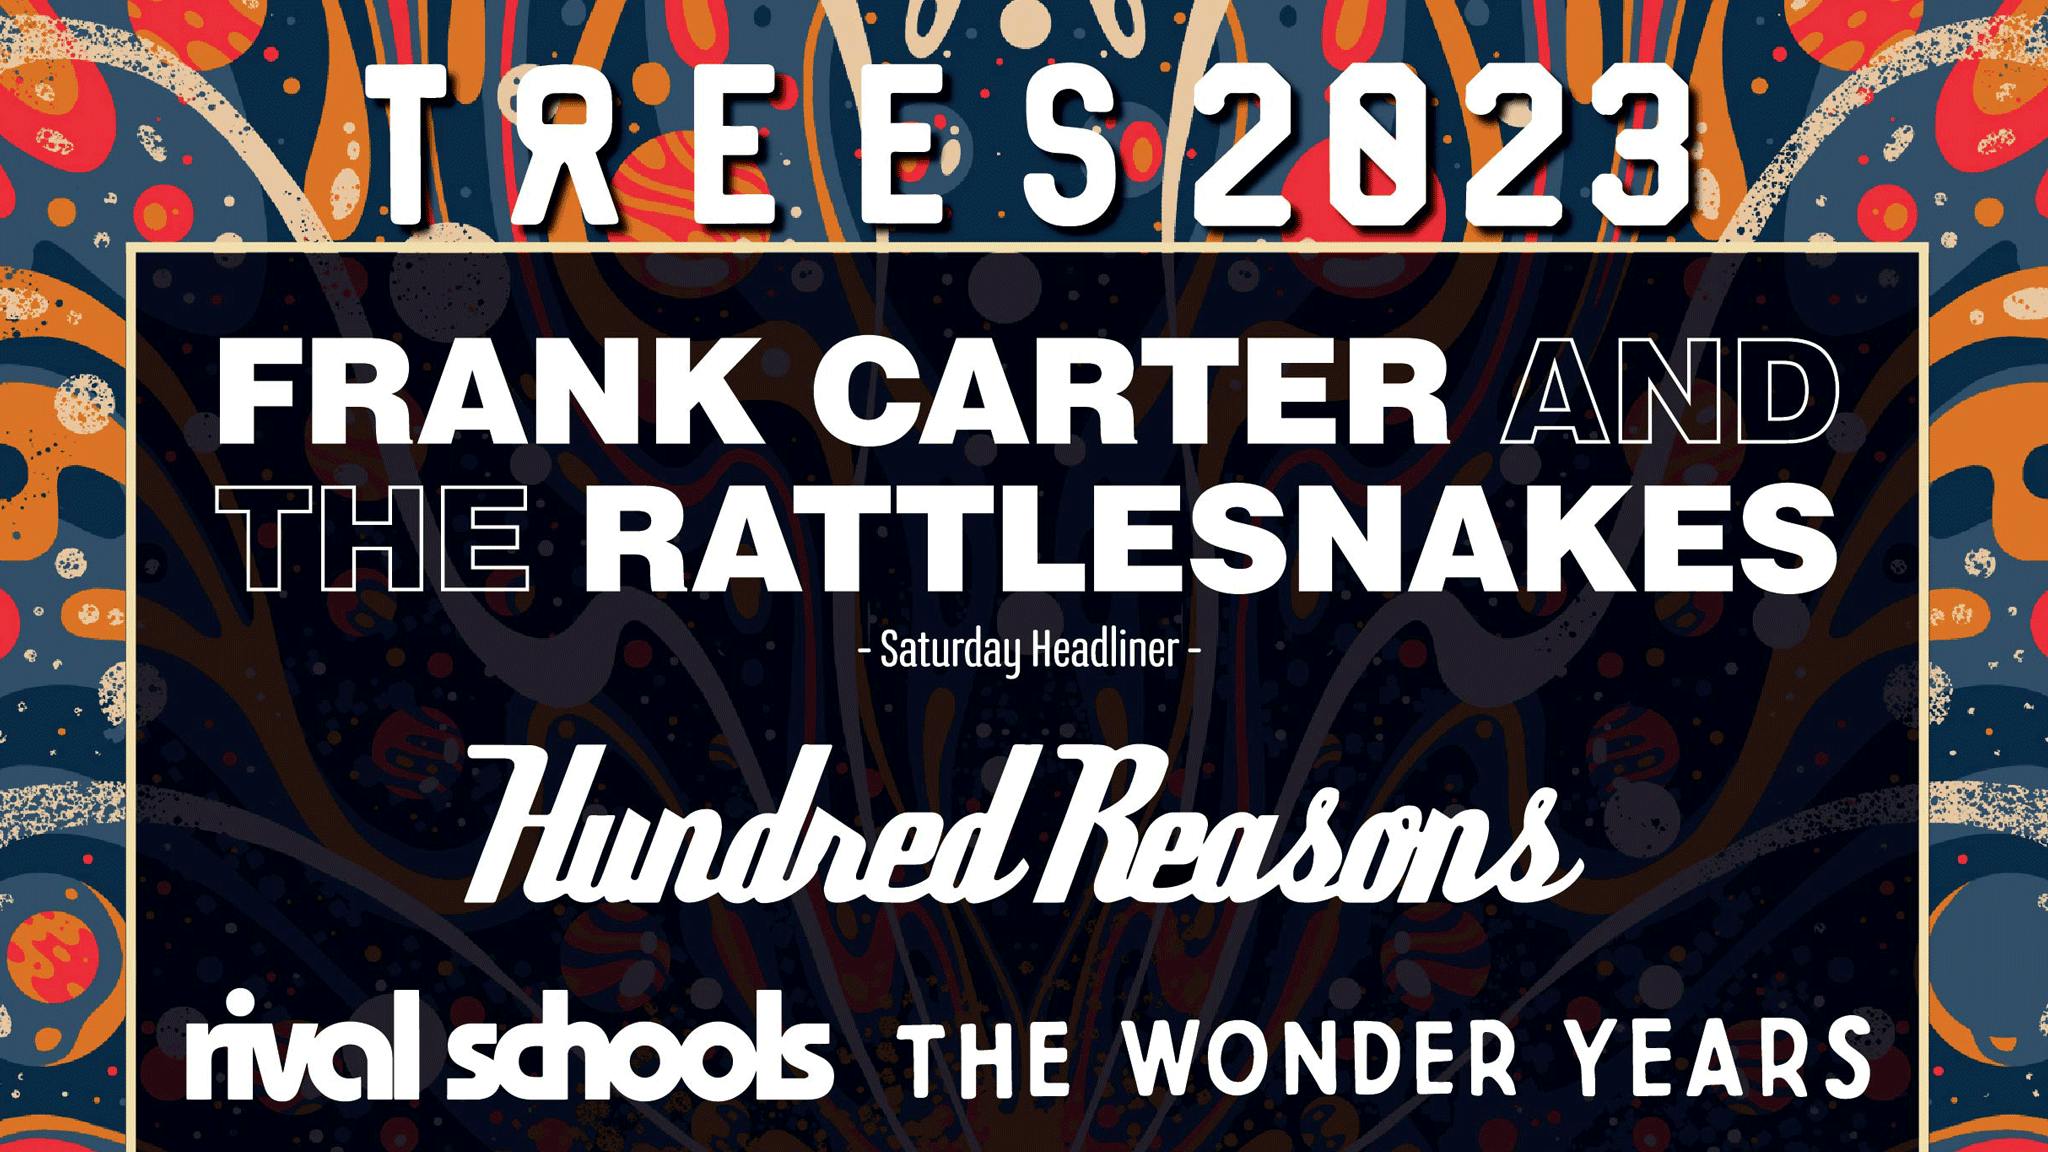 Frank Carter, The Wonder Years, Hundred Reasons and more for 2000trees